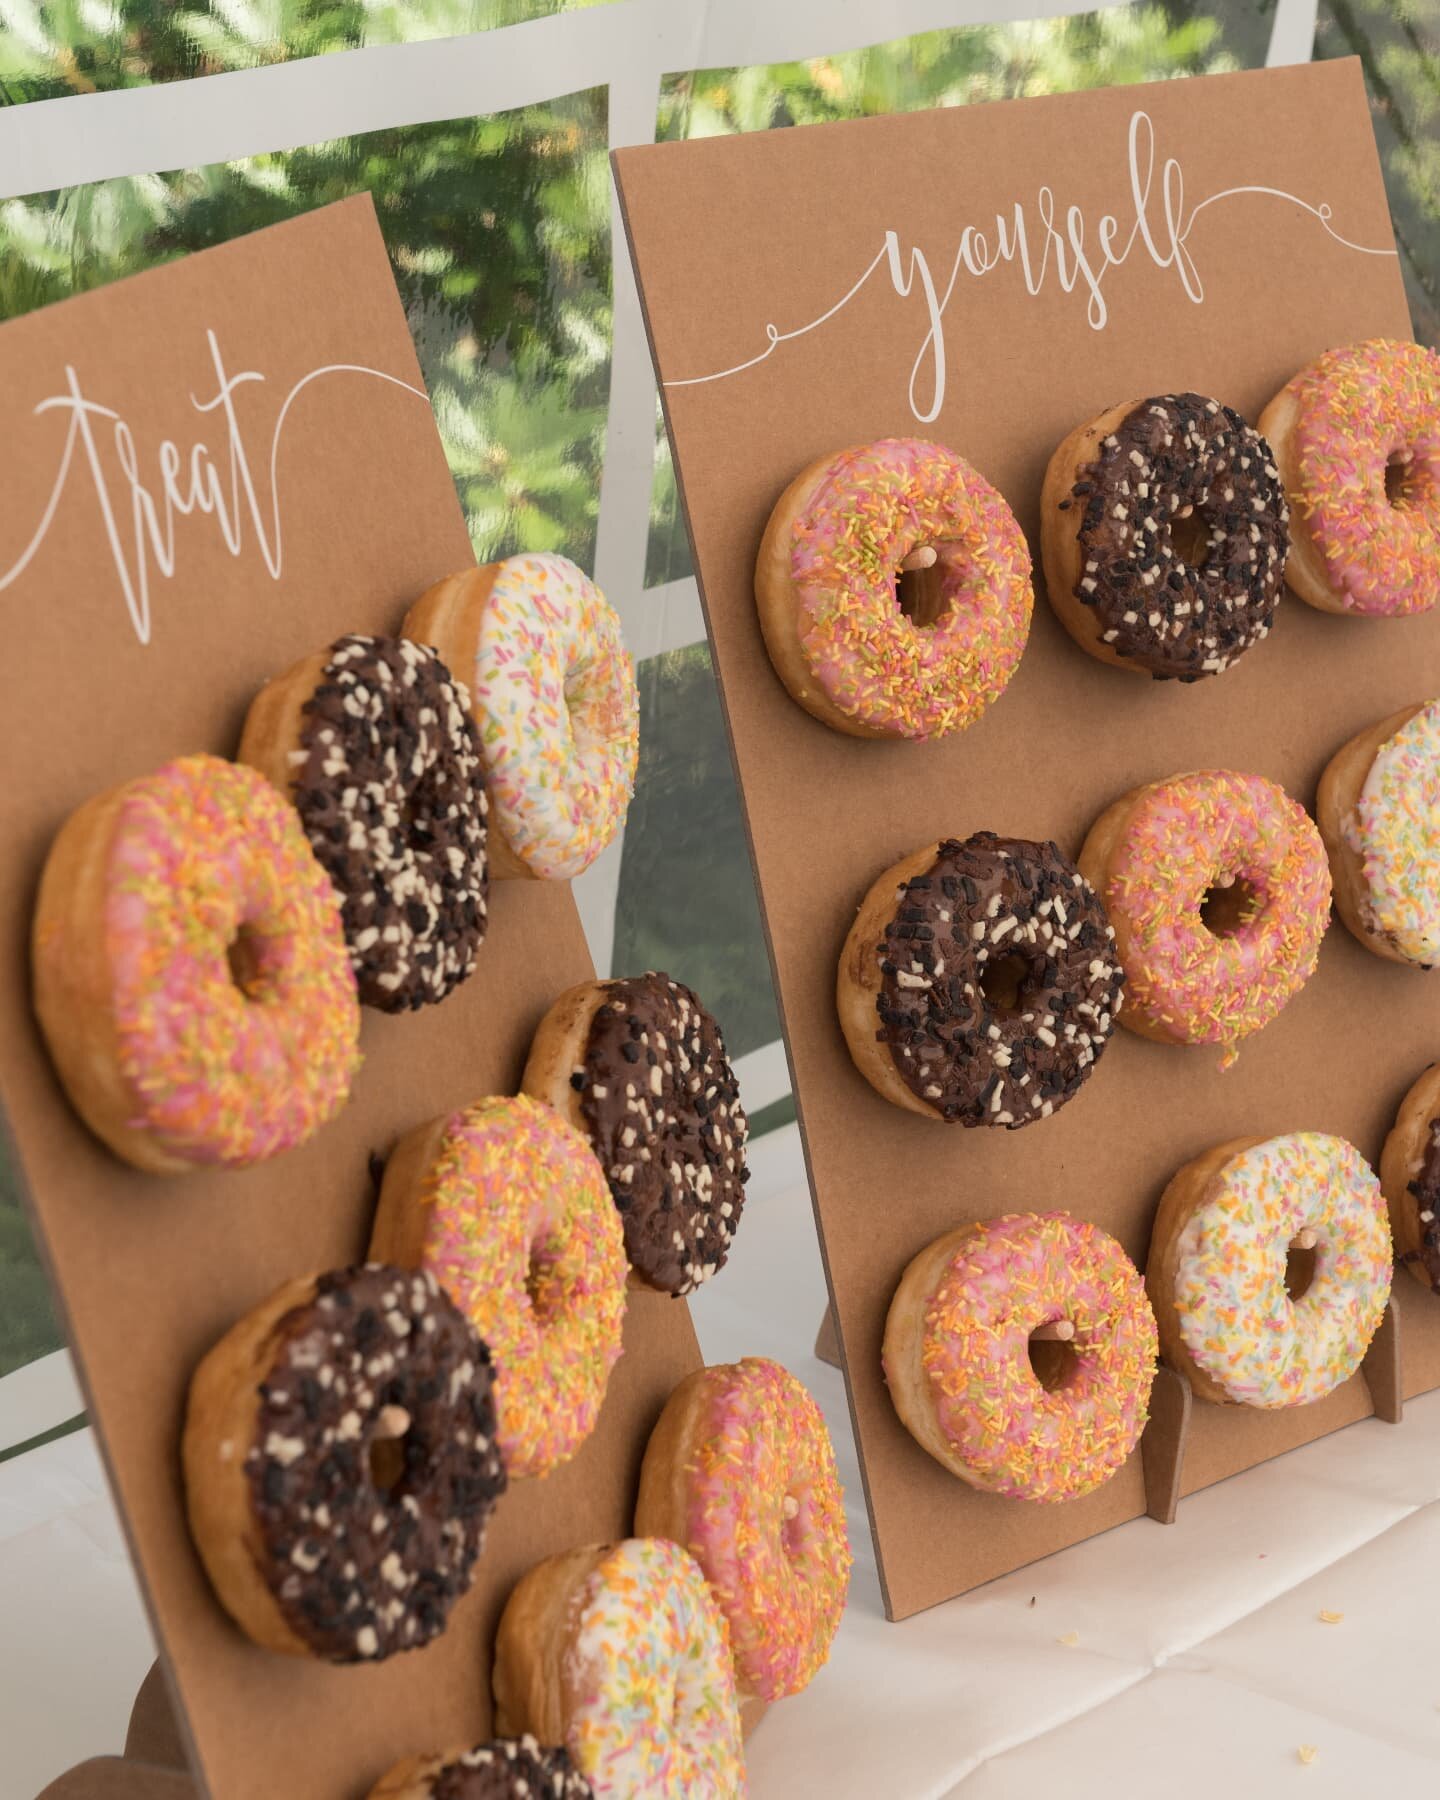 When they say donut touch. Take that seriously. What's your favourite donut flavour?